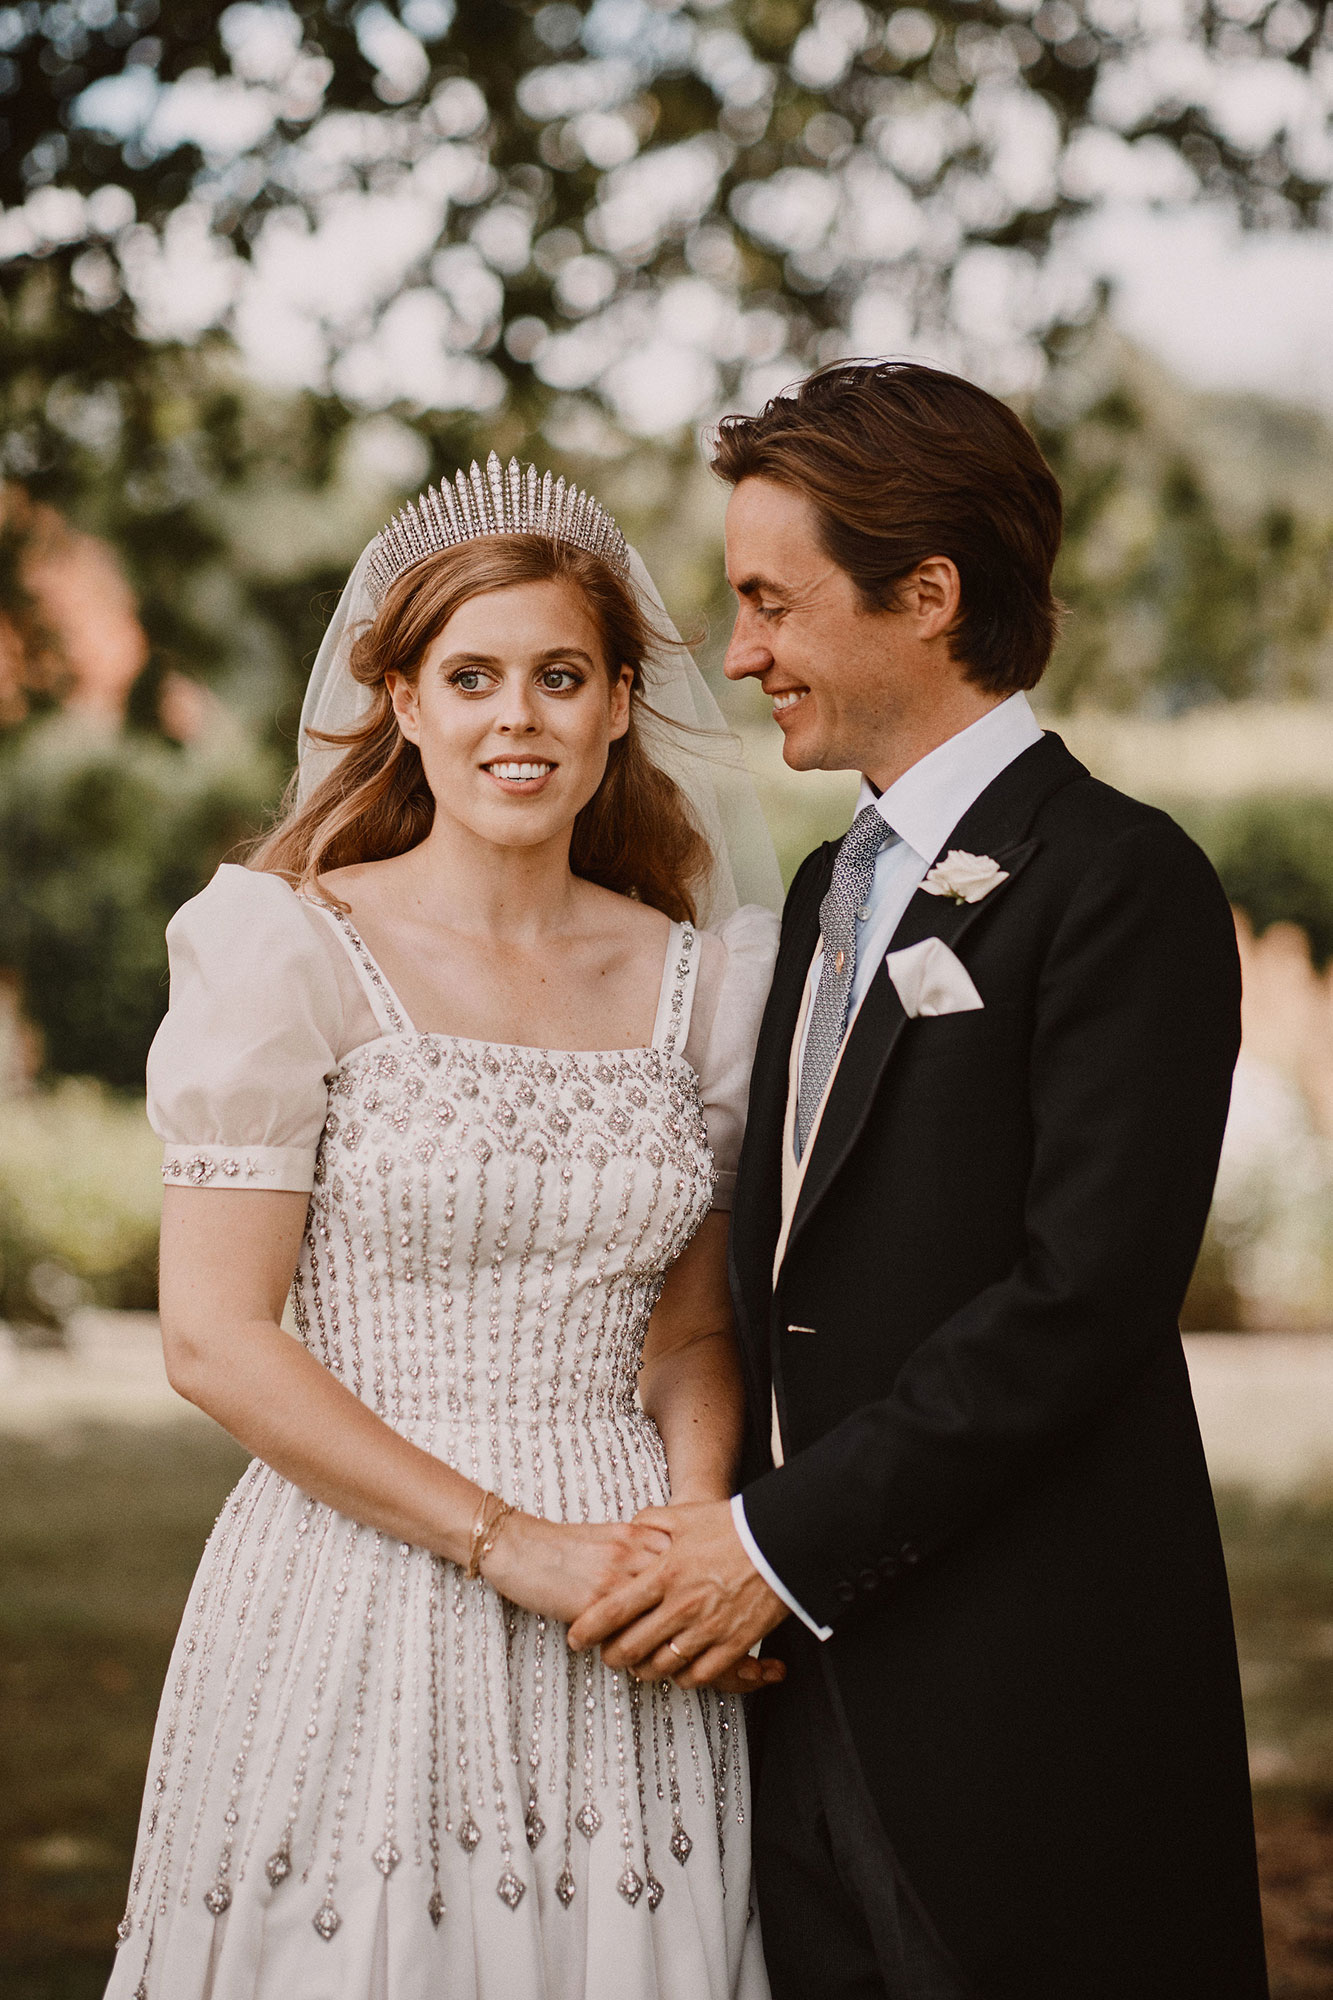 Princess Beatrice's name was changed as it was 'too yuppie' for the Queen Of England